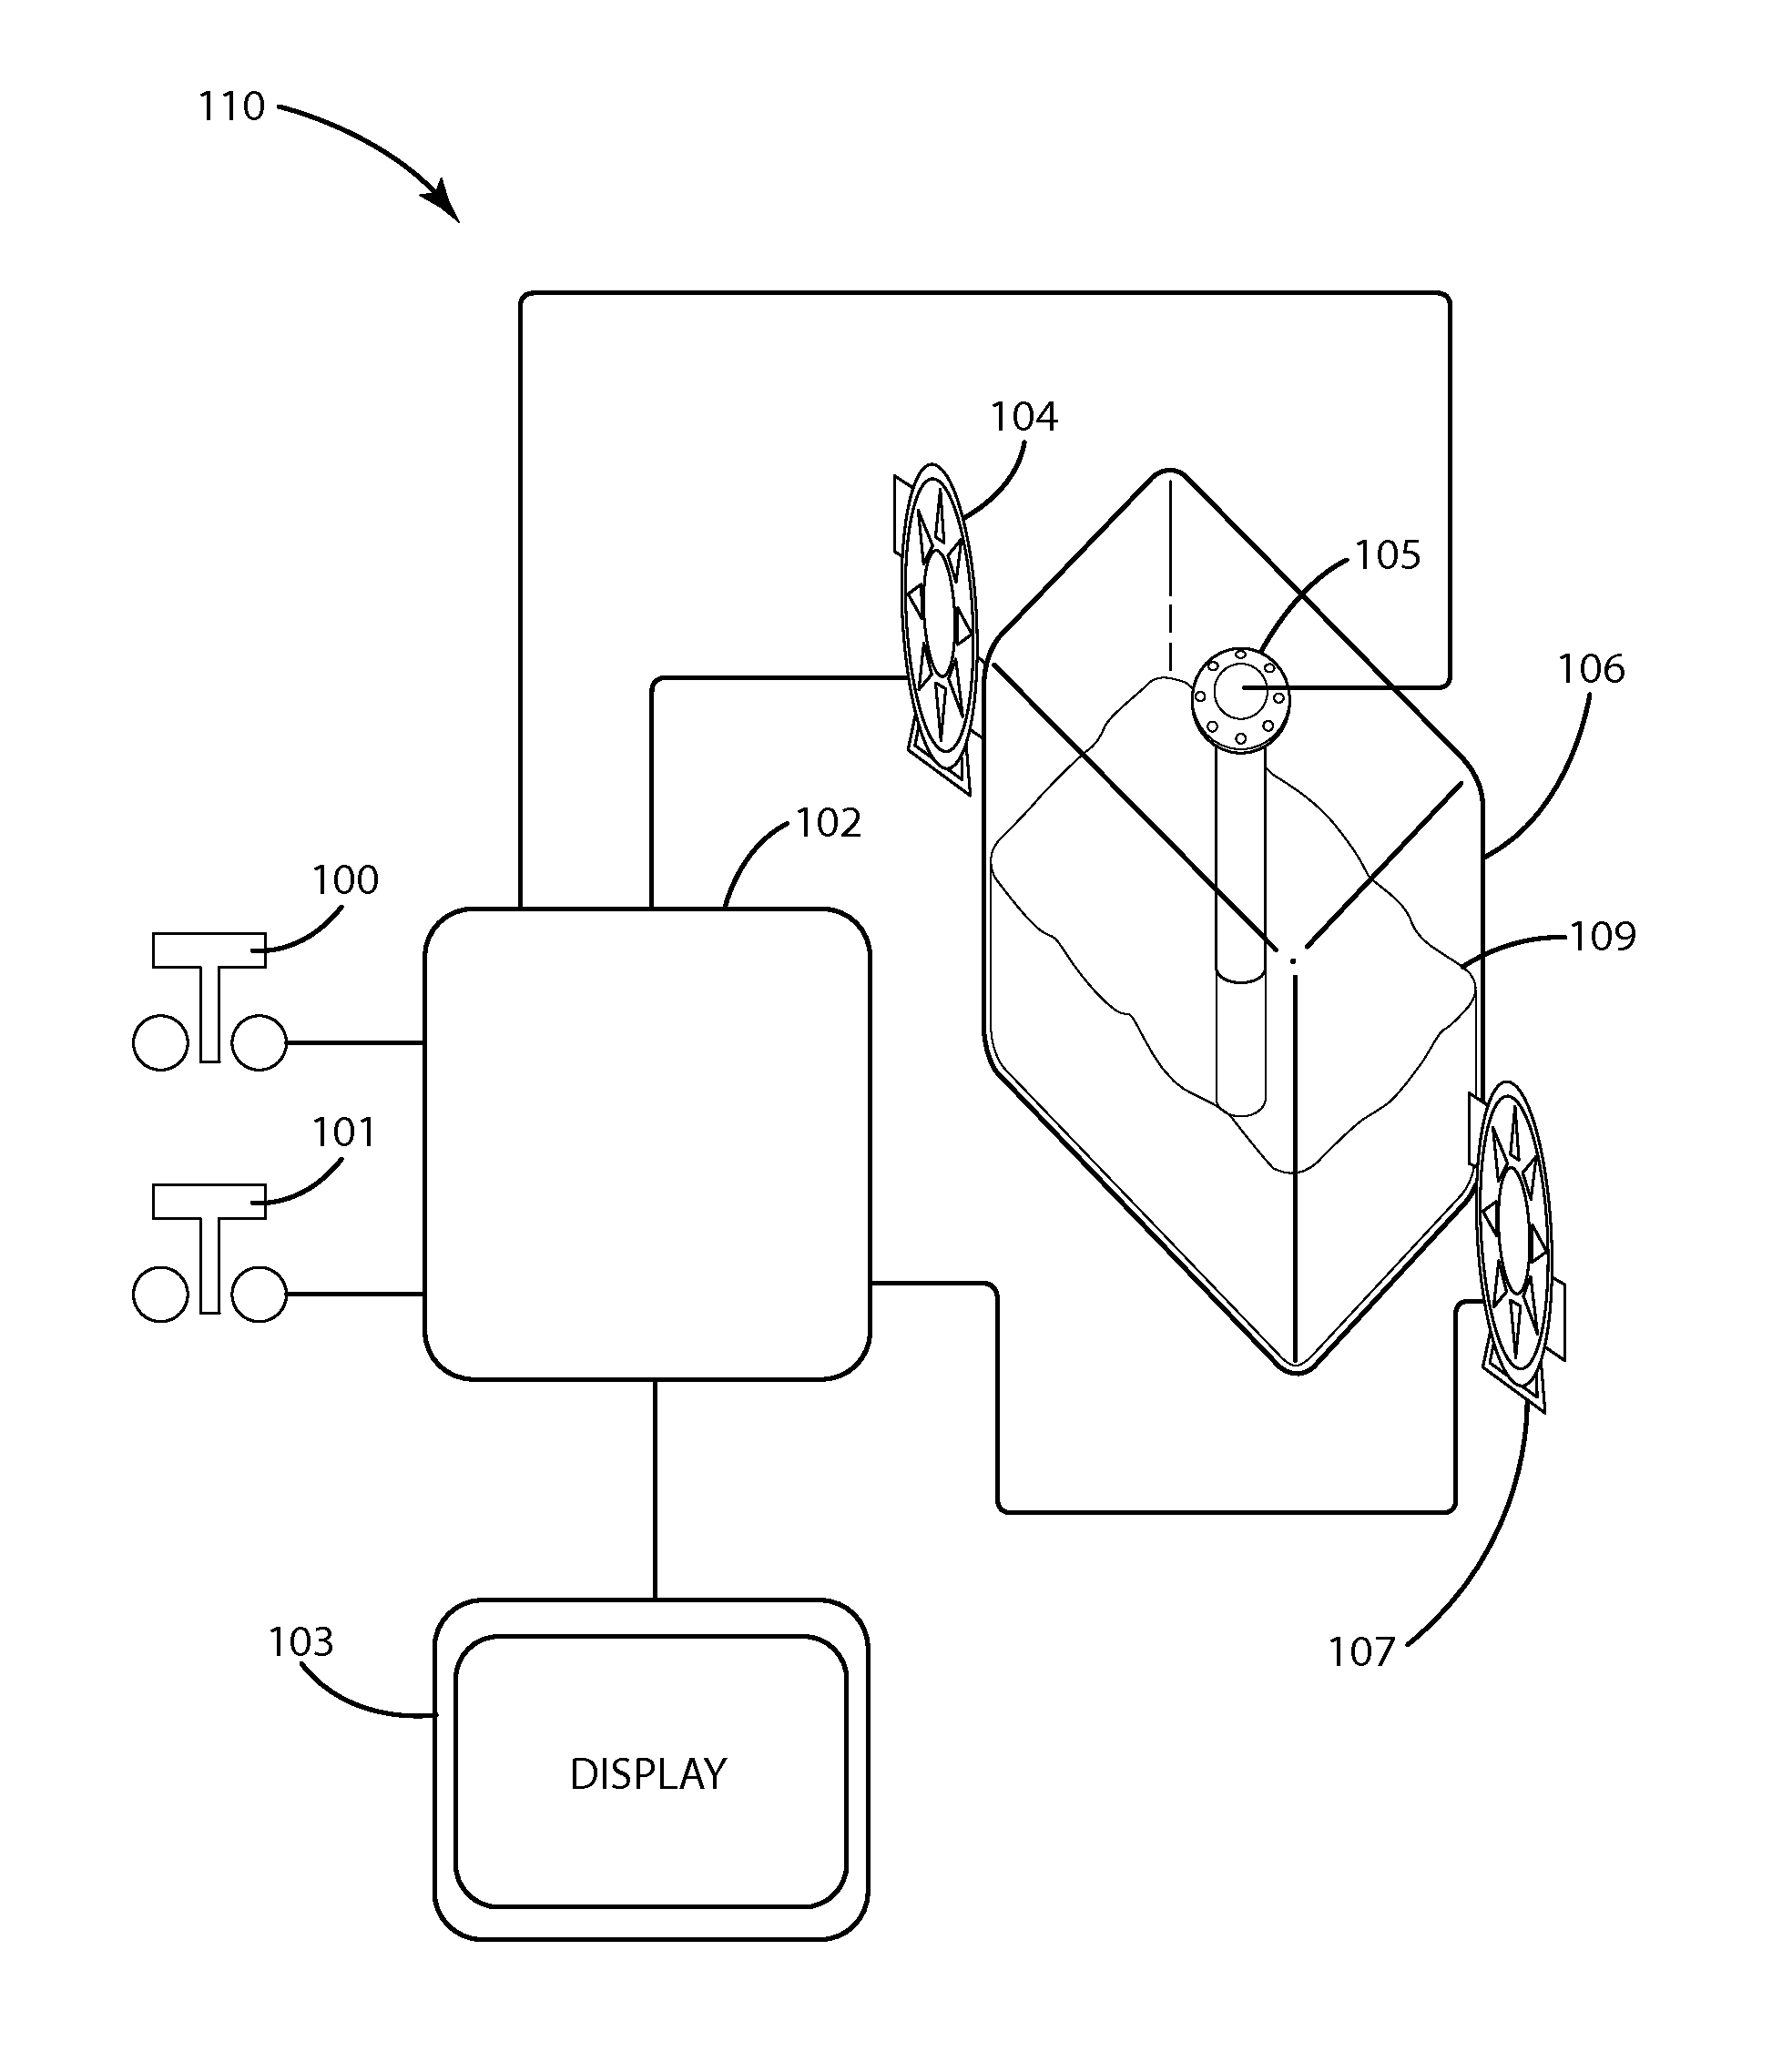 Ballast system and related methods